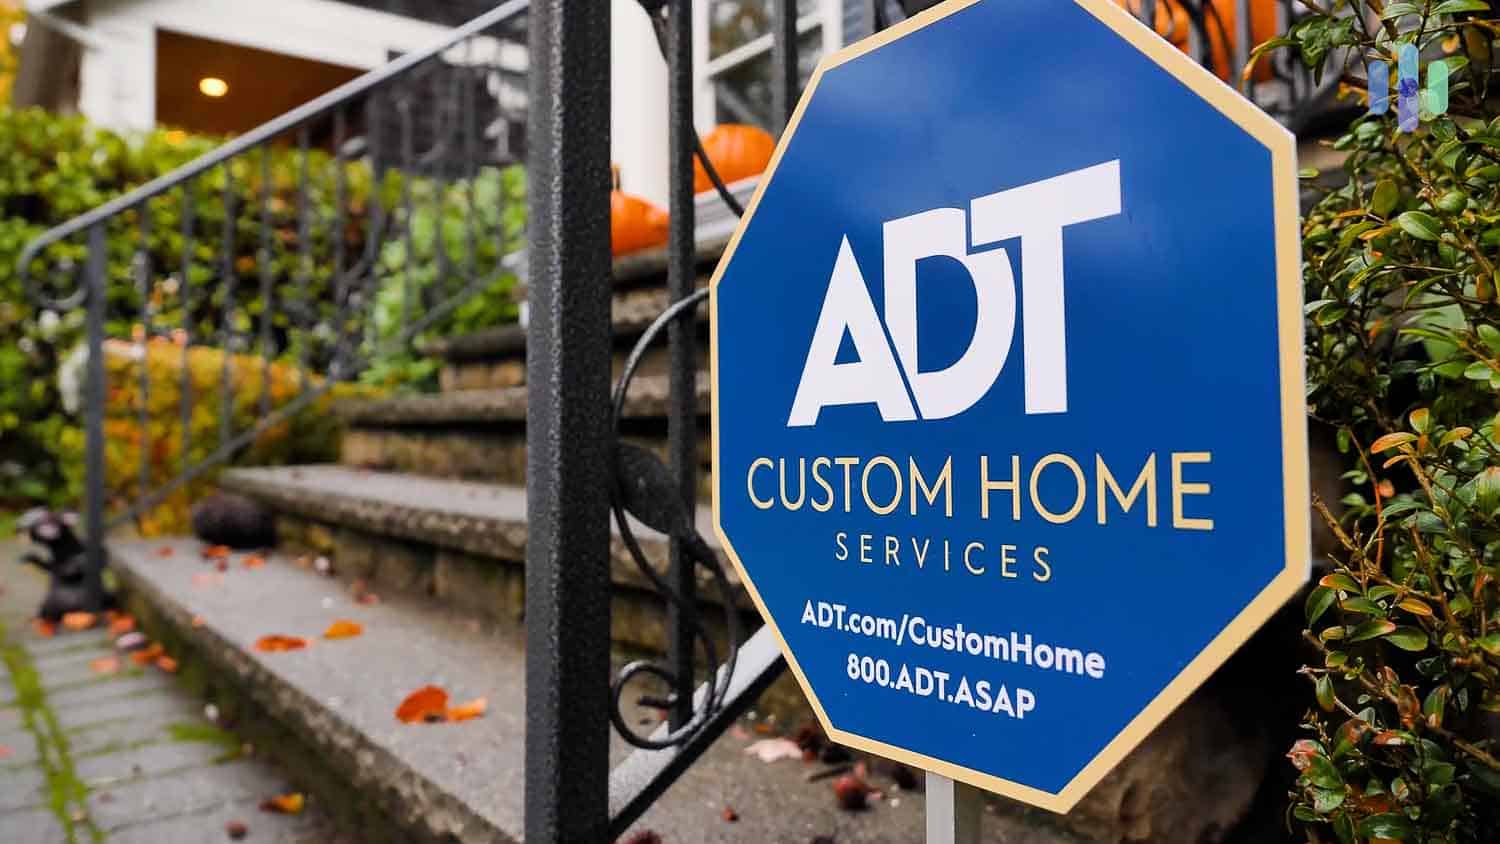 Our ADT Home Security Yard Sign